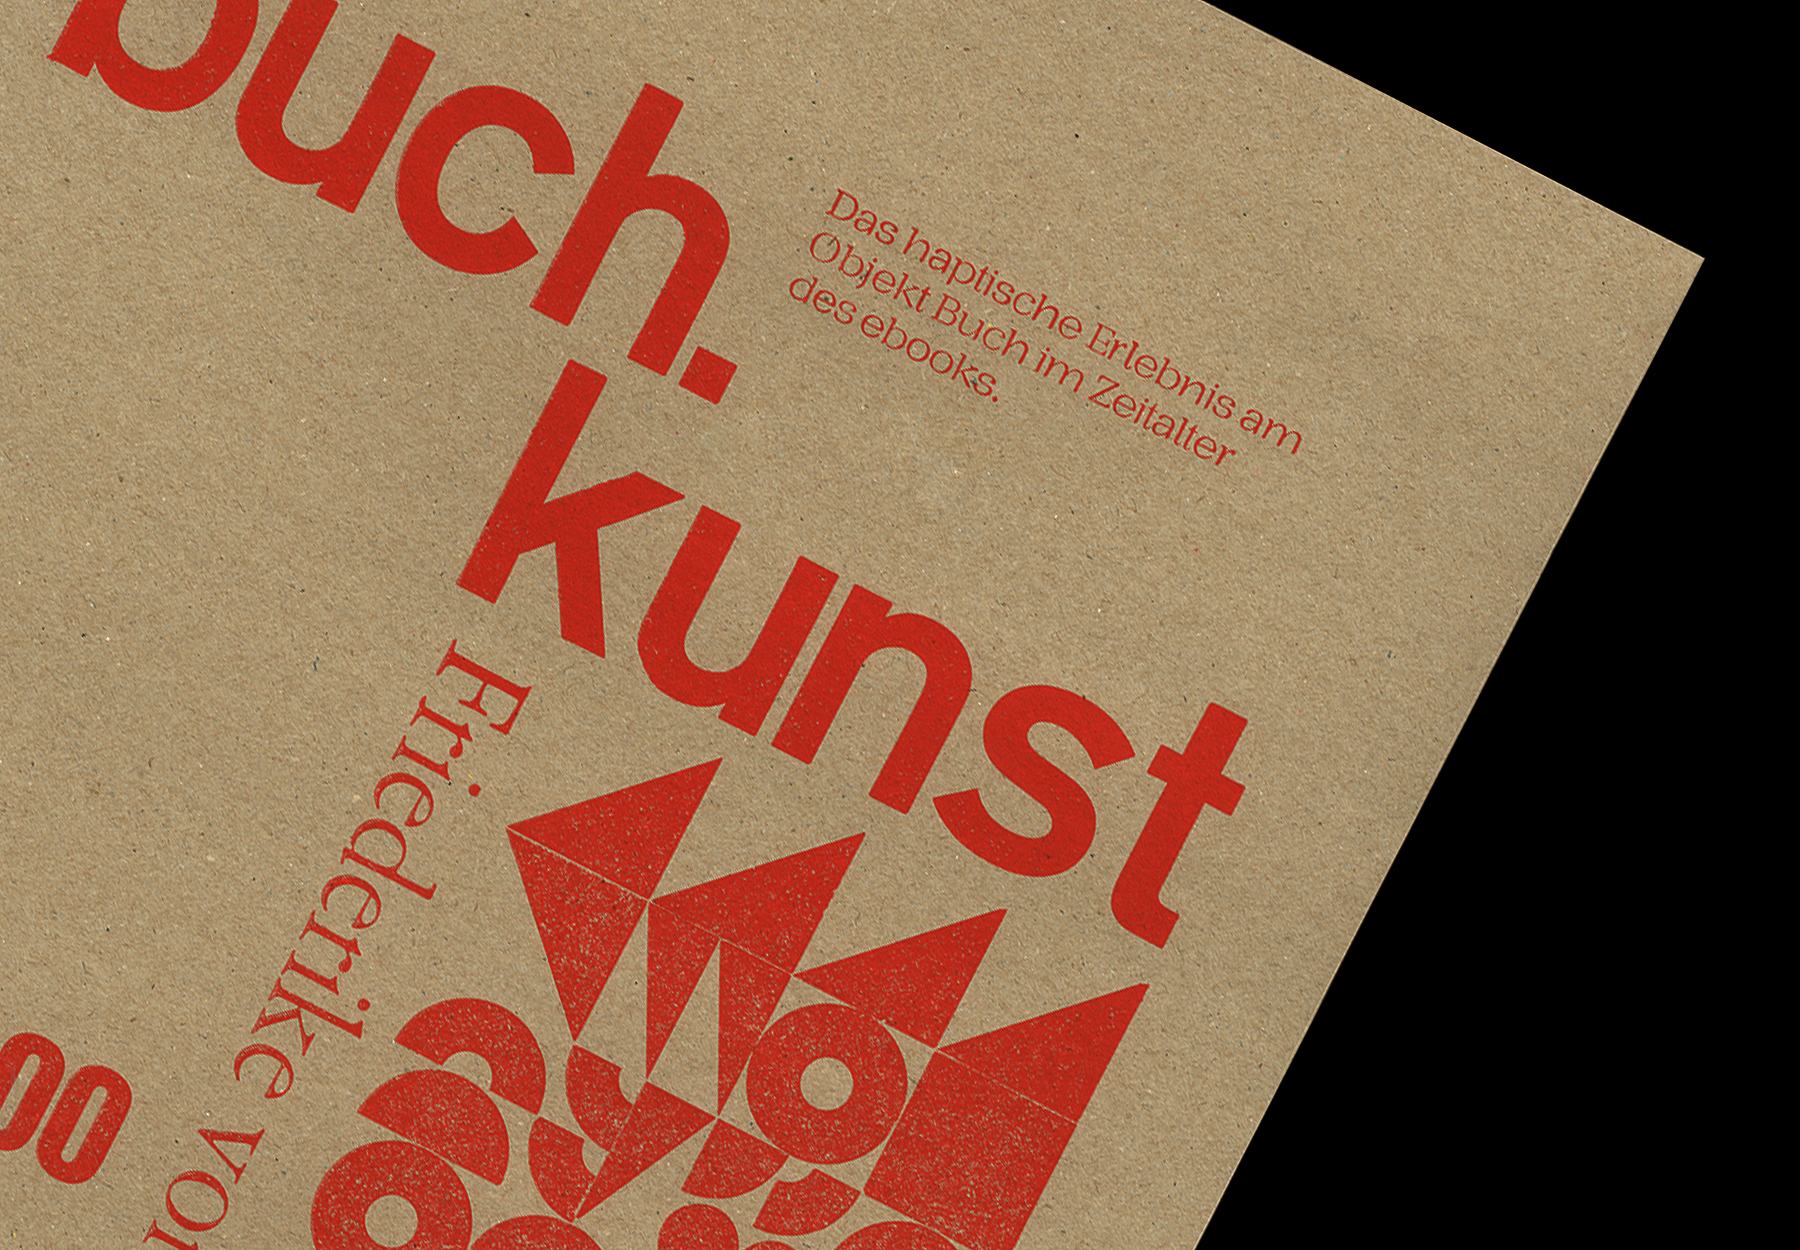 Buch.kunst lecture poster - Fonts In Use